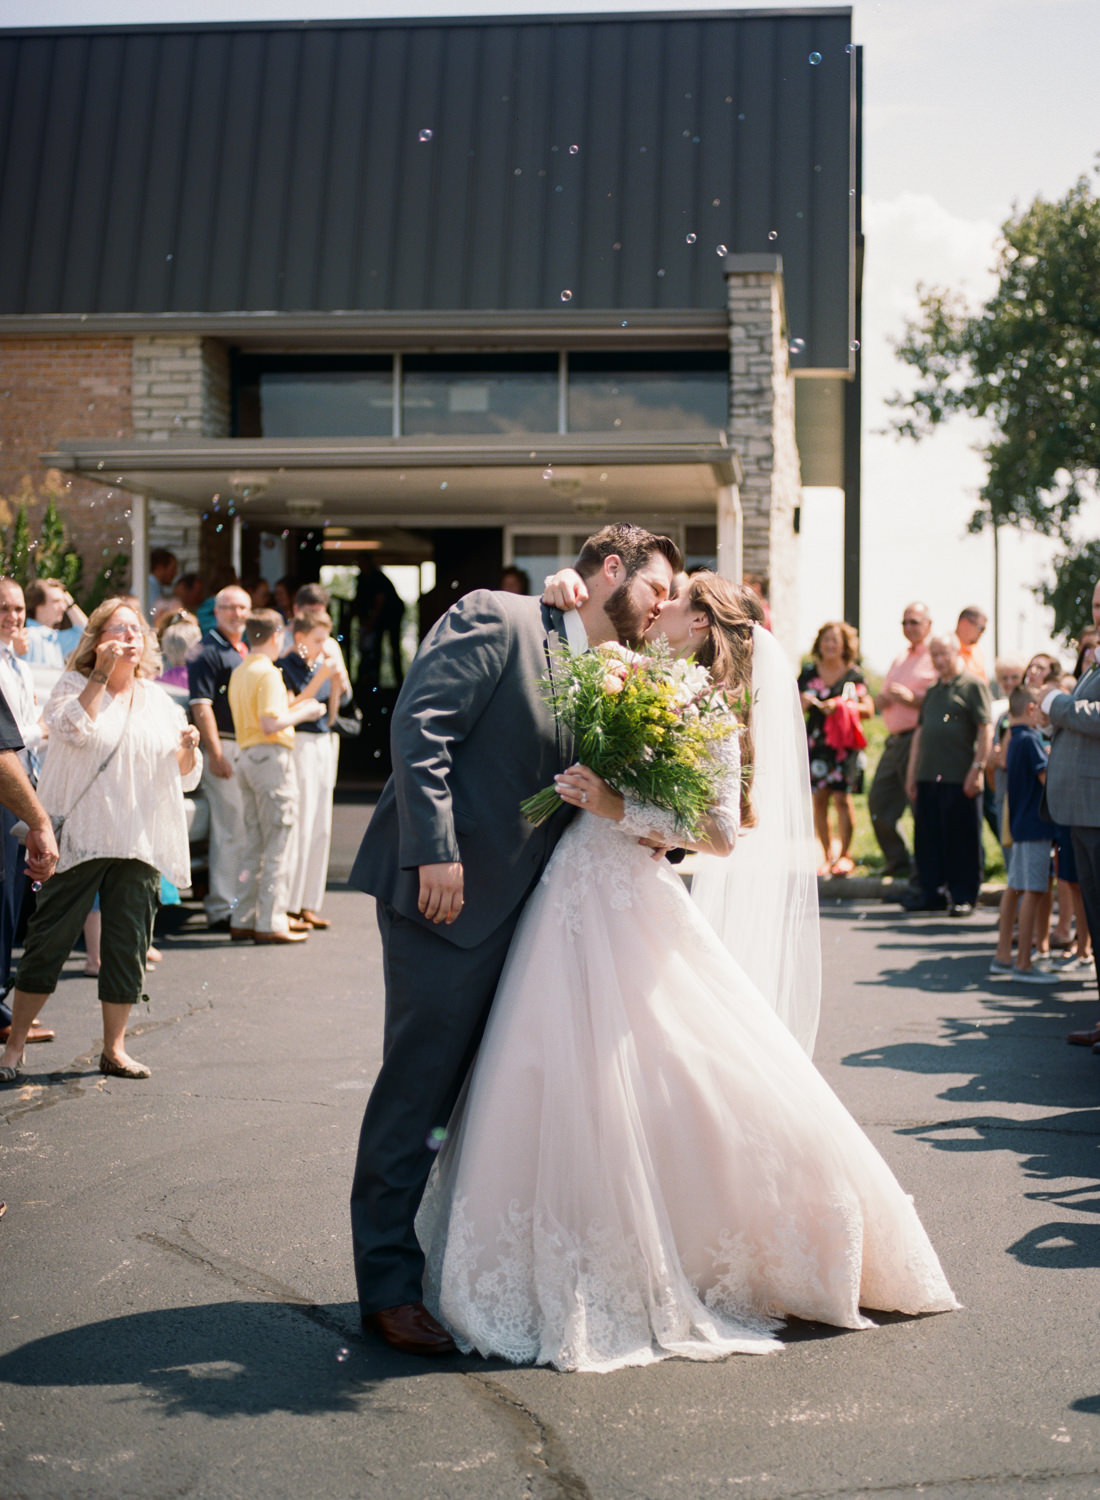 Bride and groom bubble exit, St. Louis wedding photographer